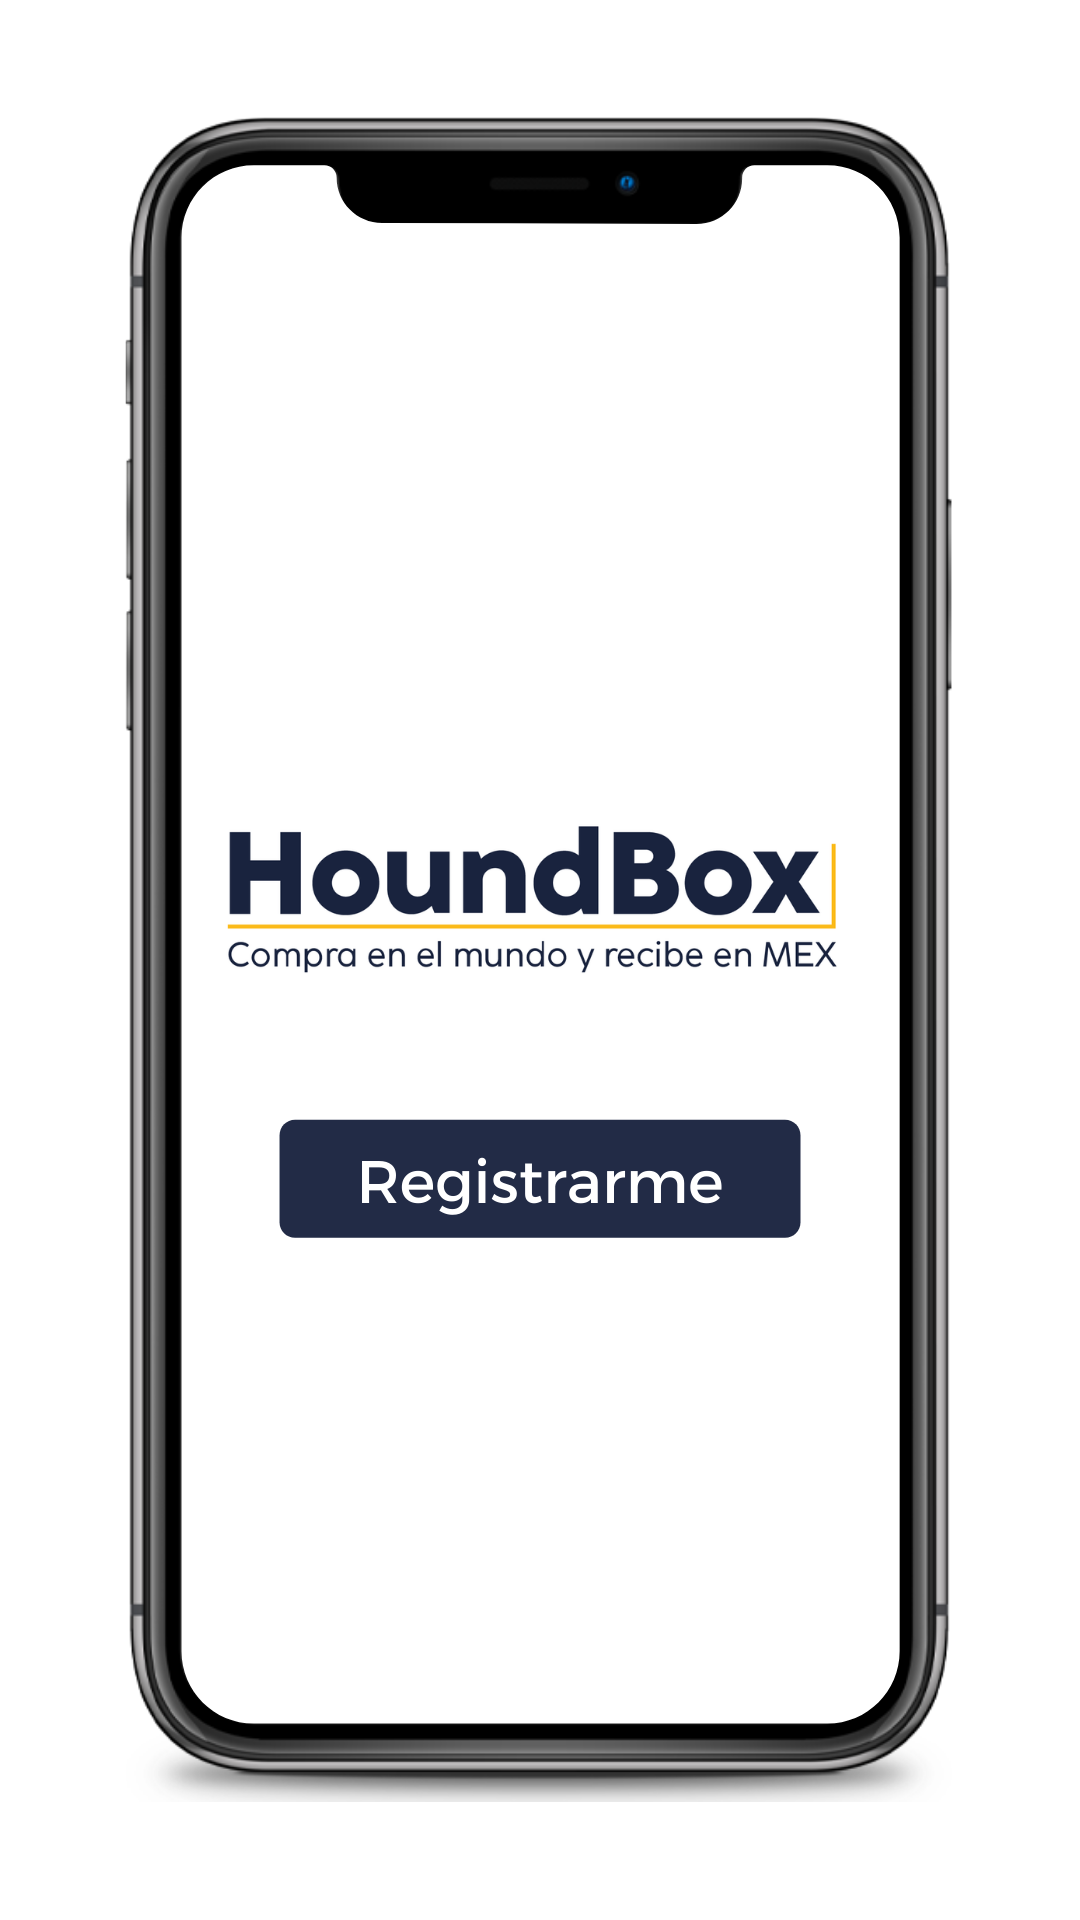 houndbox packages trackin delivery